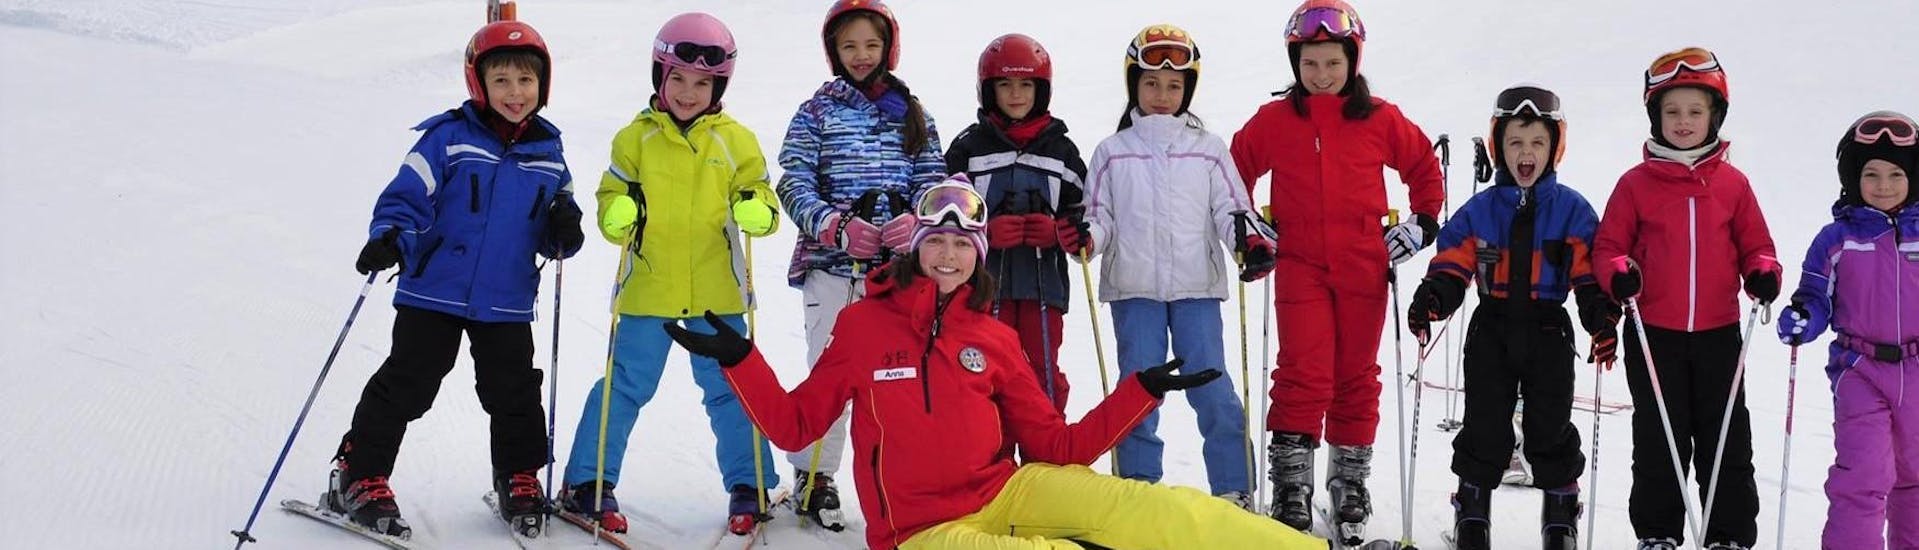 Kids Ski Lessons (4-12 y.) for All Levels - Holidays.